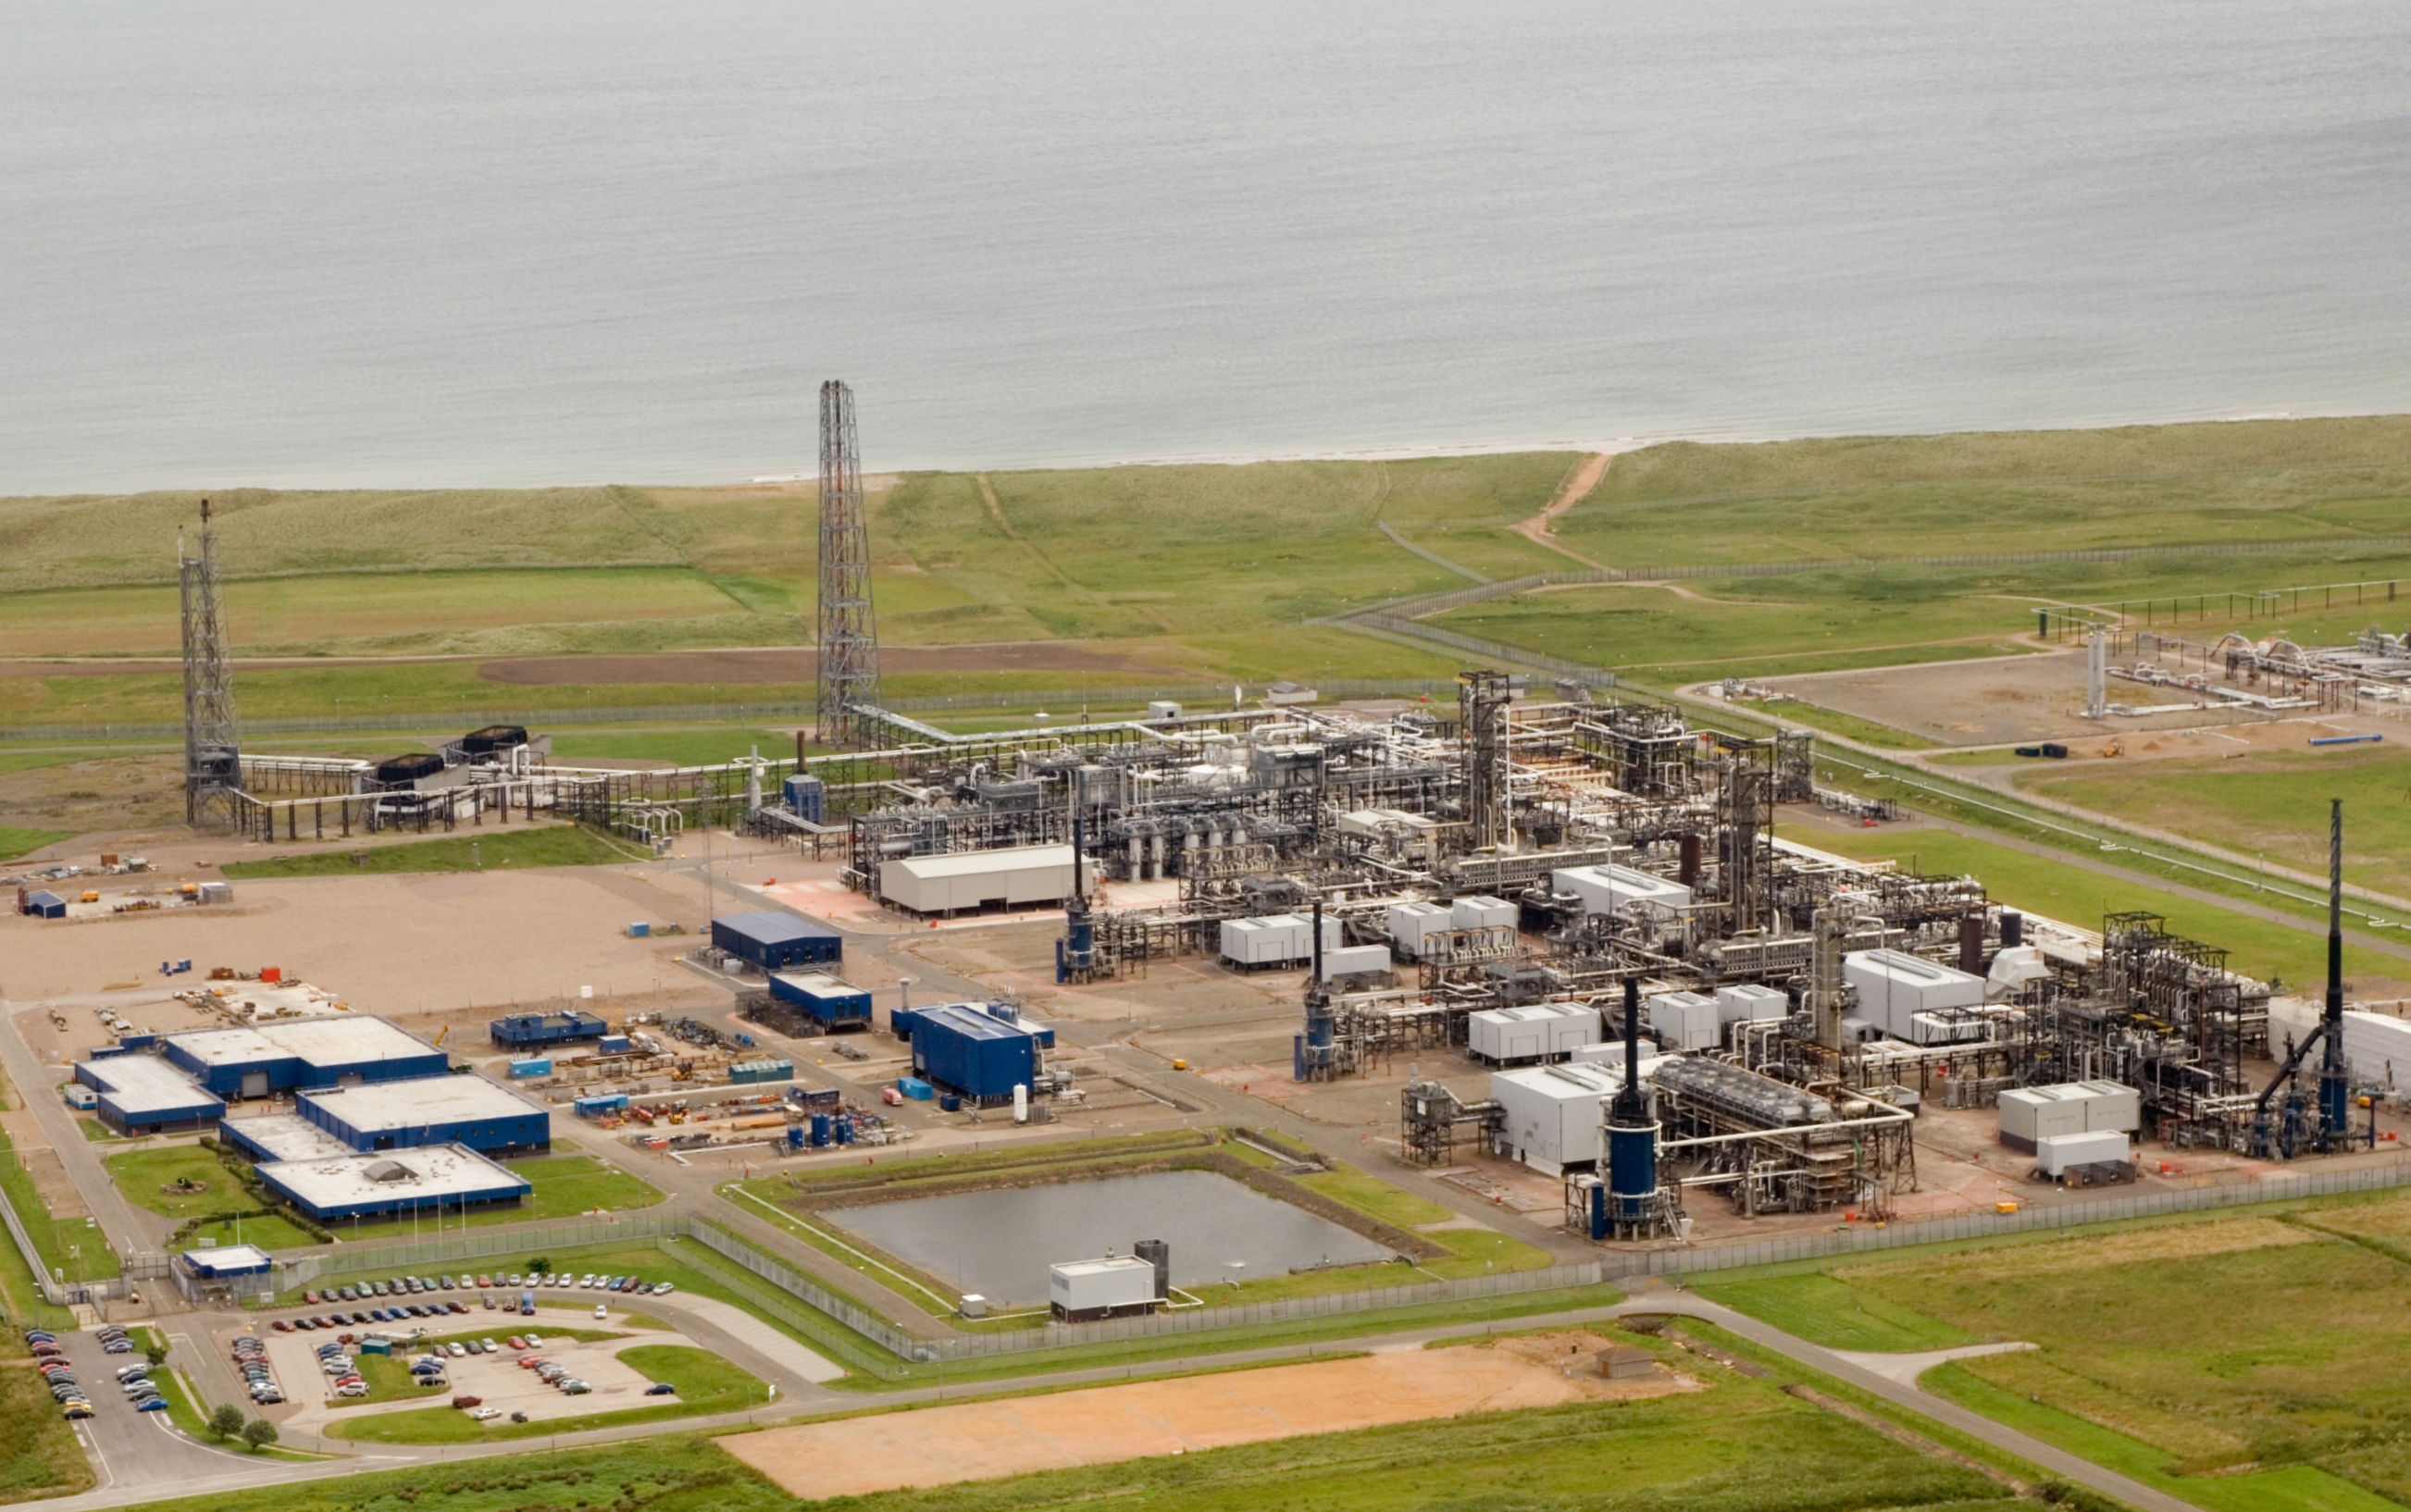 Image Acorn aims to capture and store around 5-6 million tons of CO2 per year by 2030 from gas terminals at St Fergus complex at Peterhead, Scotland, including our SEGAL joint venture gas terminal.